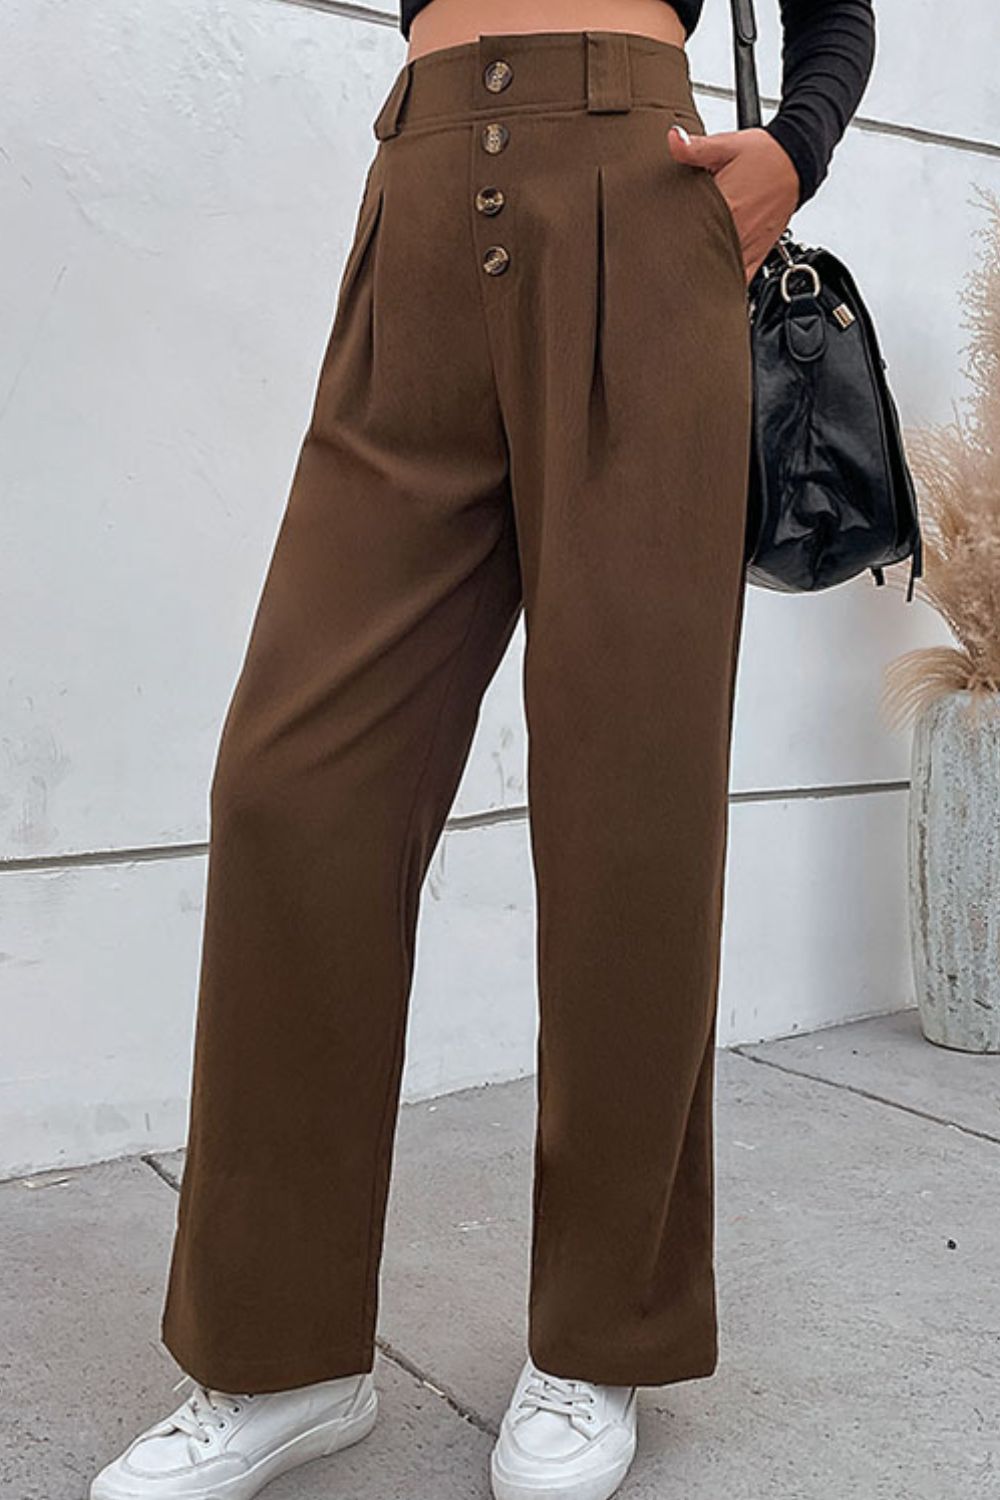 Gray It's Never Too Late Button-Fly Pleated Waist Wide Leg Pants with Pockets Pants